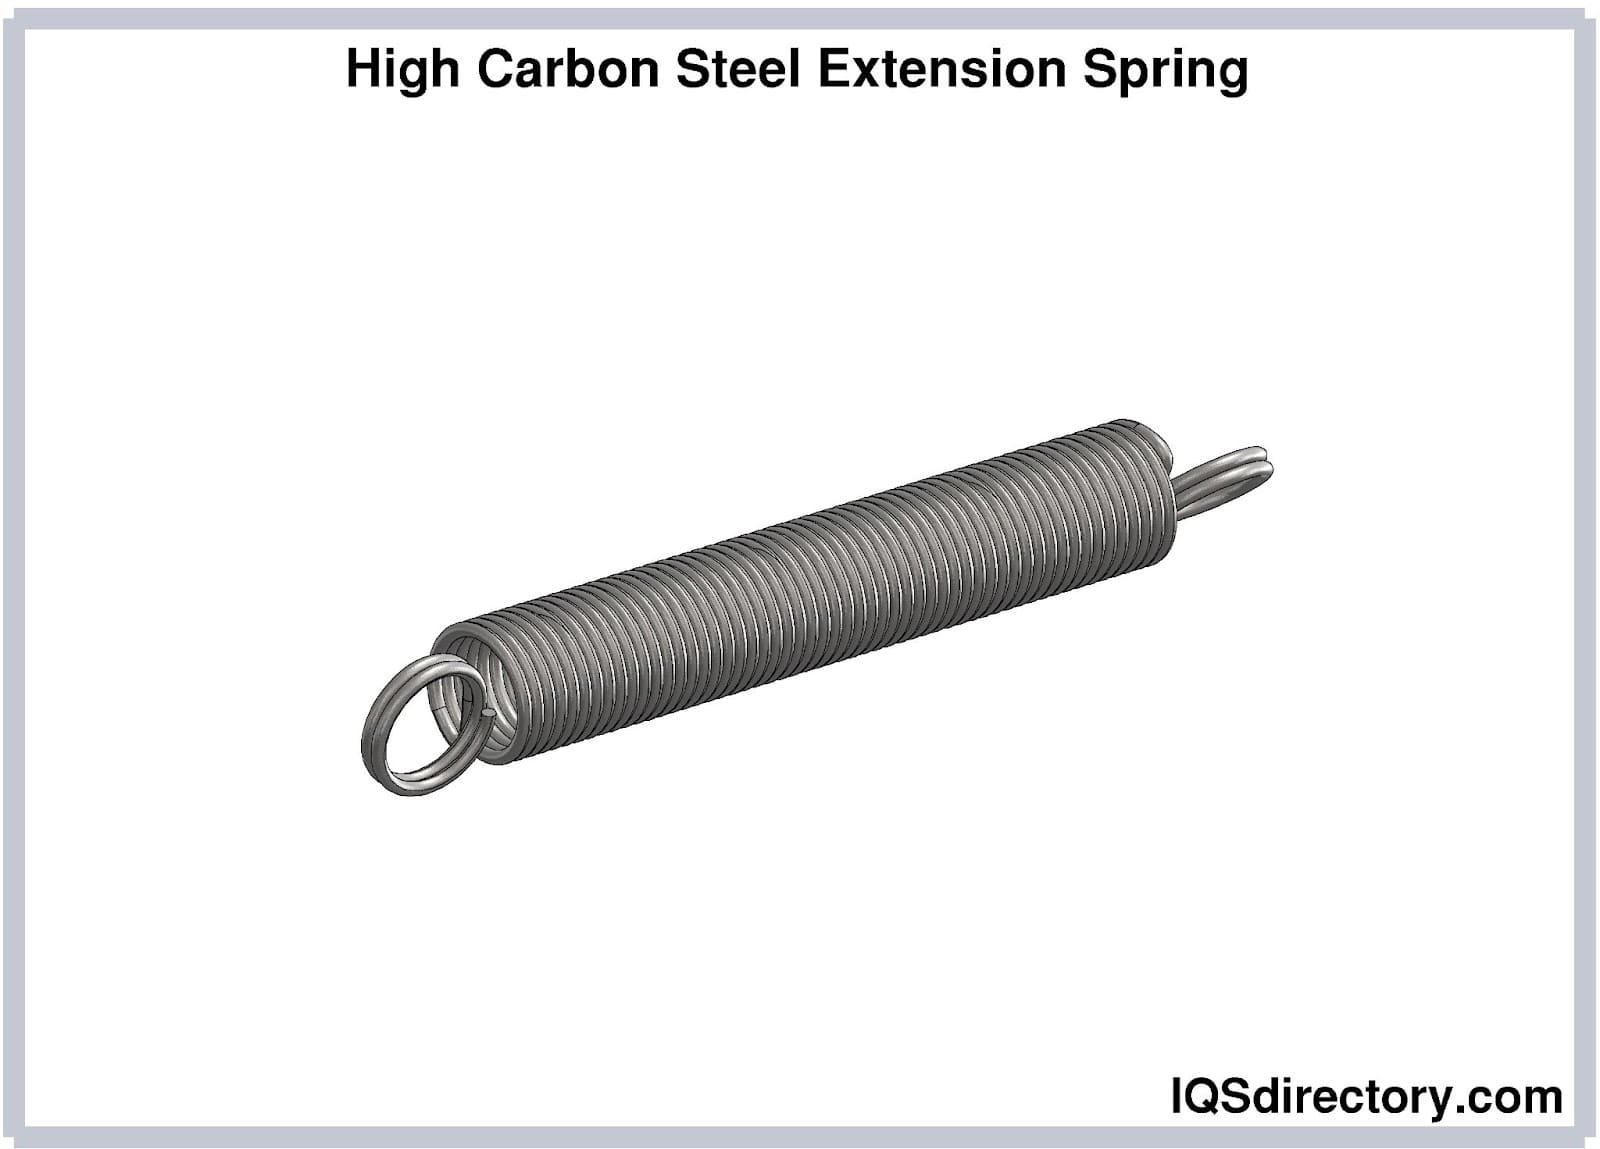 High Carbon Steel Extension Spring